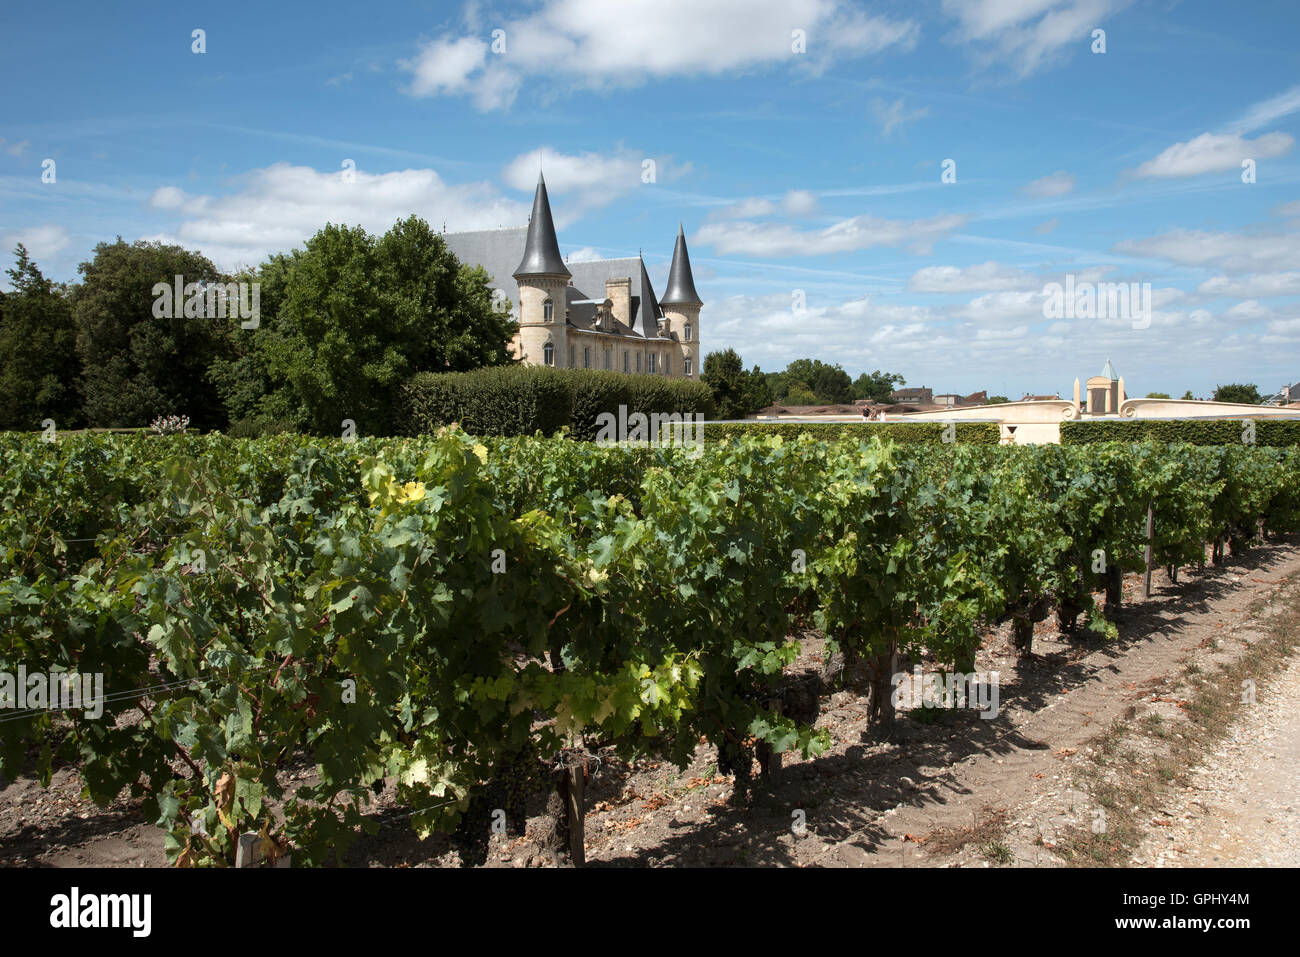 Pauillac Bordeaux France - The historic Chateau Pichon Longueville Baron situated along the wine route of Pauillac Stock Photo